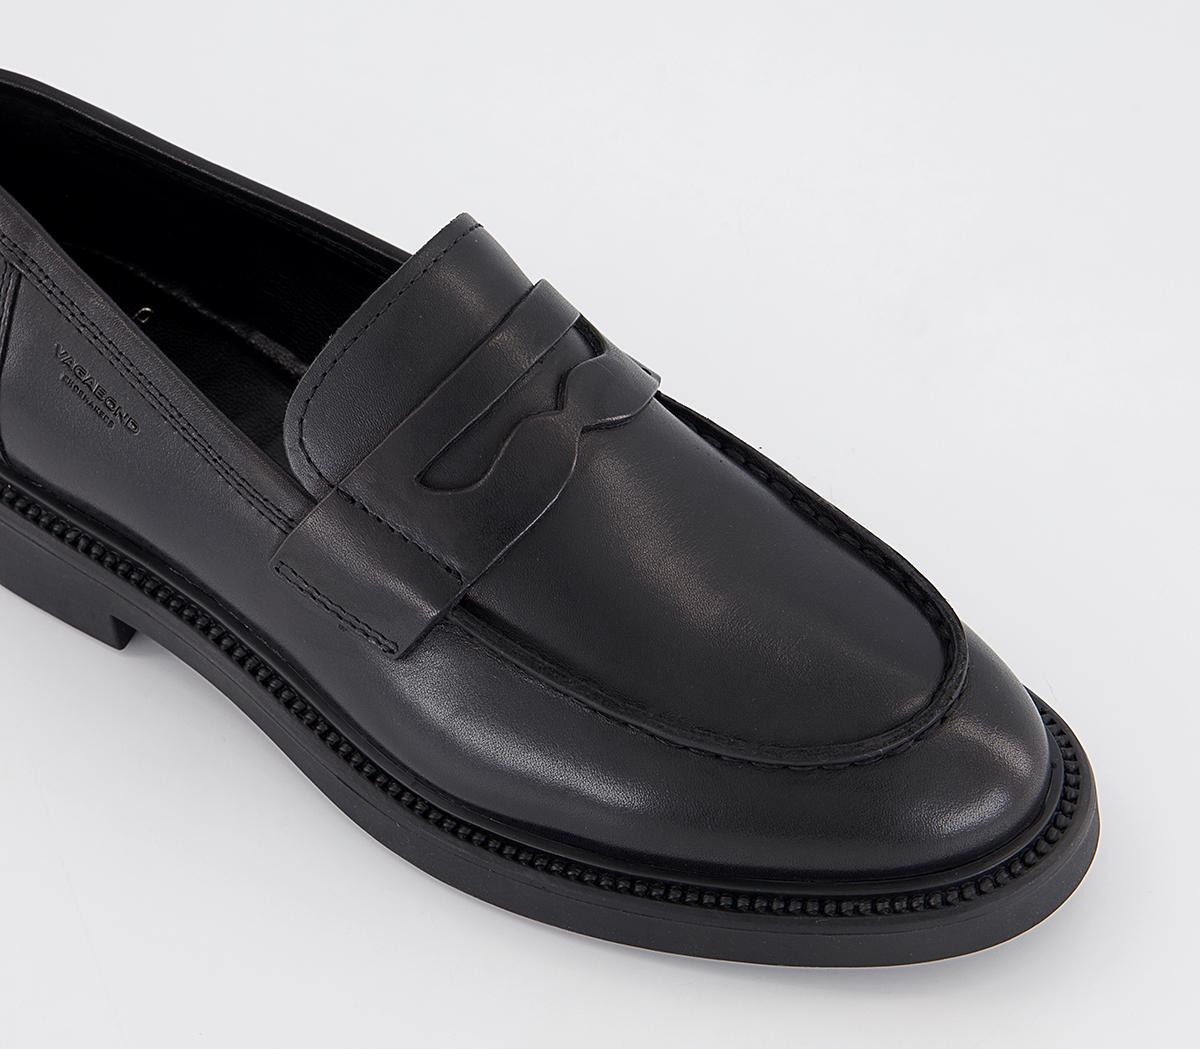 Vagabond Shoemakers Alex W Loafers Black Leather - Flat Shoes for Women